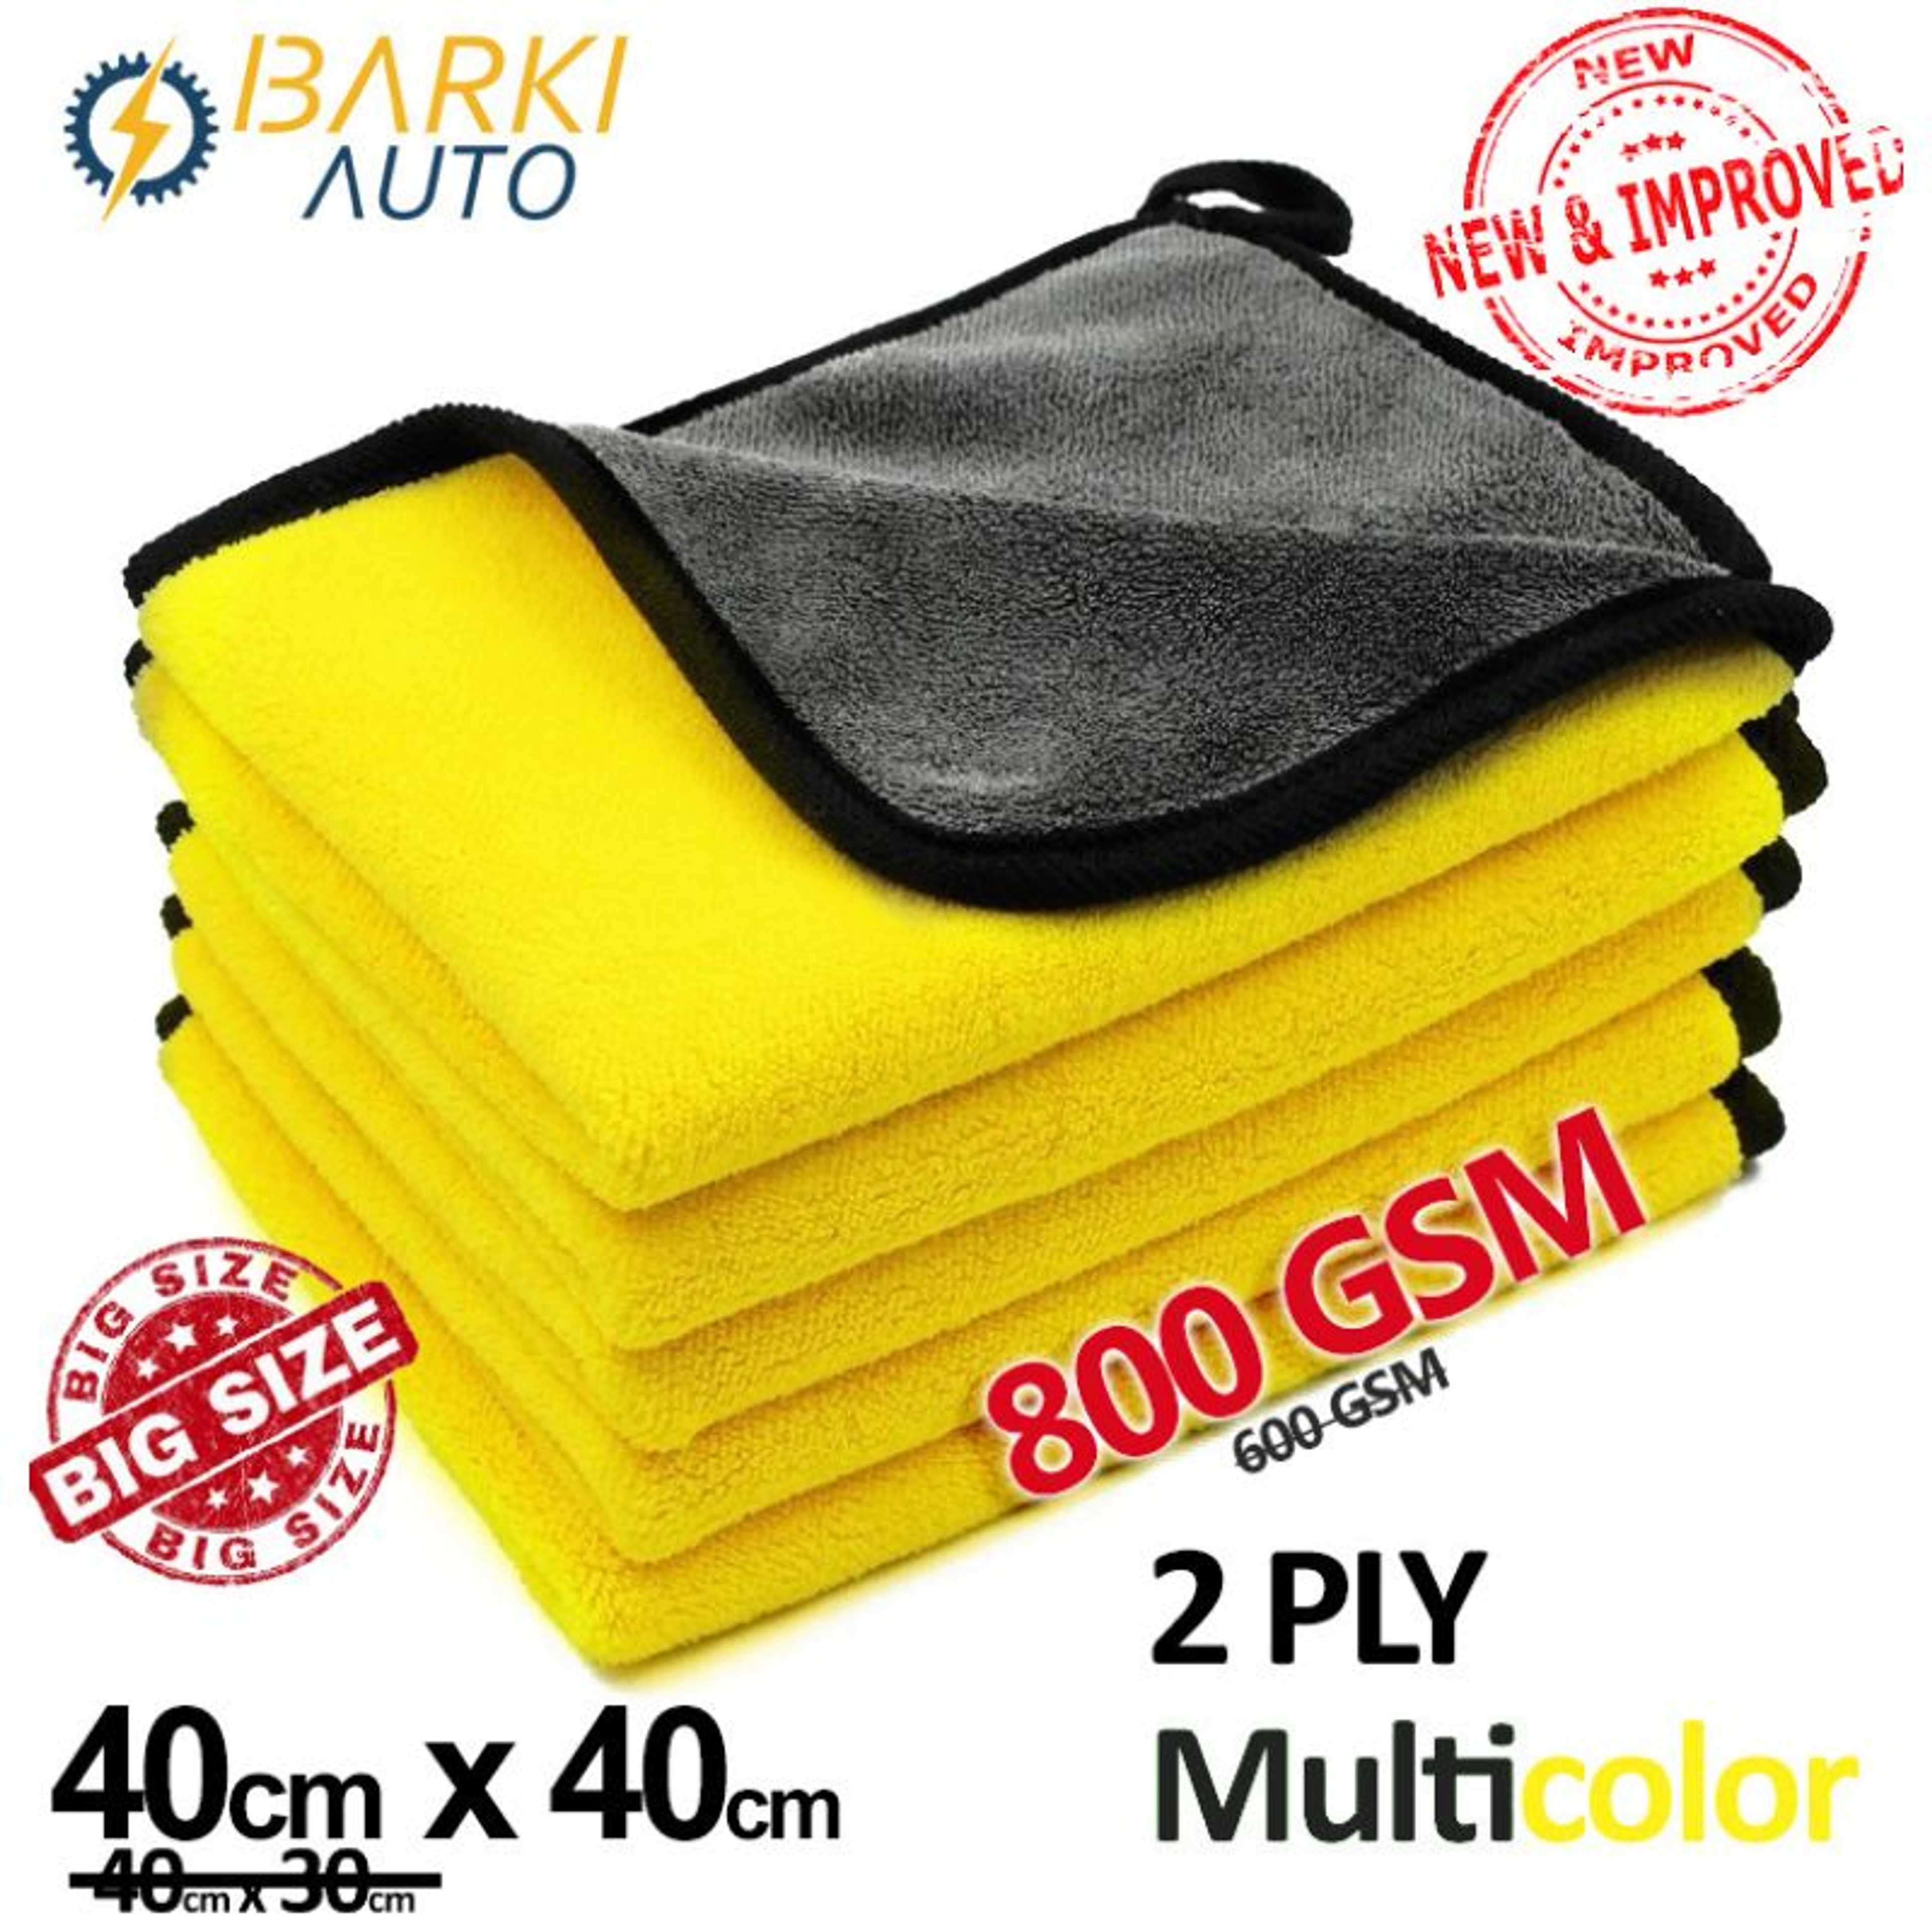 Microfiber Towel 40*40 cm | cleaner duster & wipe wax for car care double side